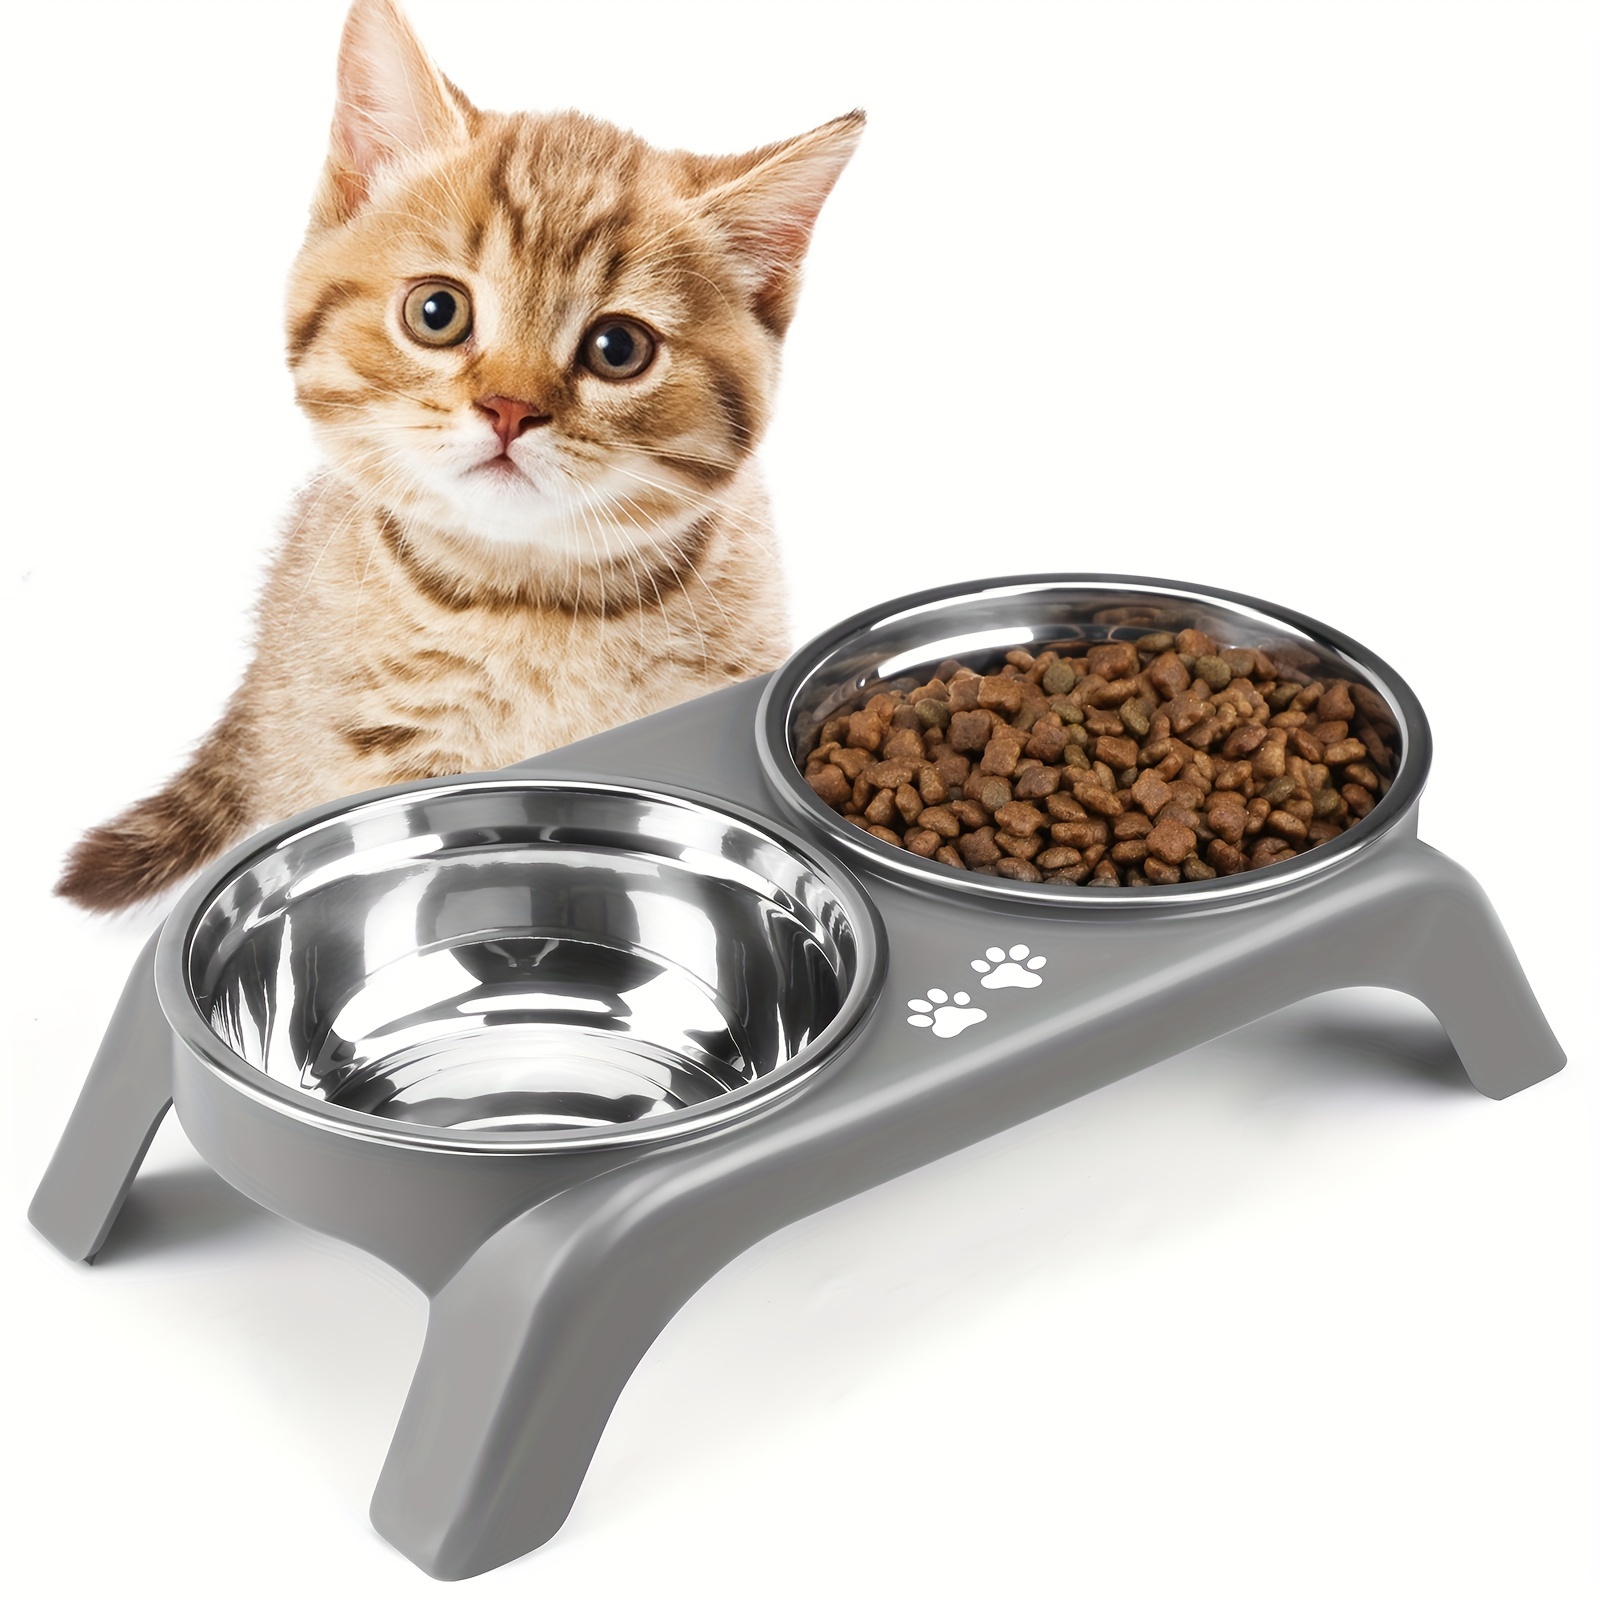 

pet-friendly Design" Elevated Stainless Steel Cat Bowls With Non-slip Feet - Anti-vomiting, Easy Clean Design For Indoor Cats & Small Dogs, Dishwasher Safe - Black/grey